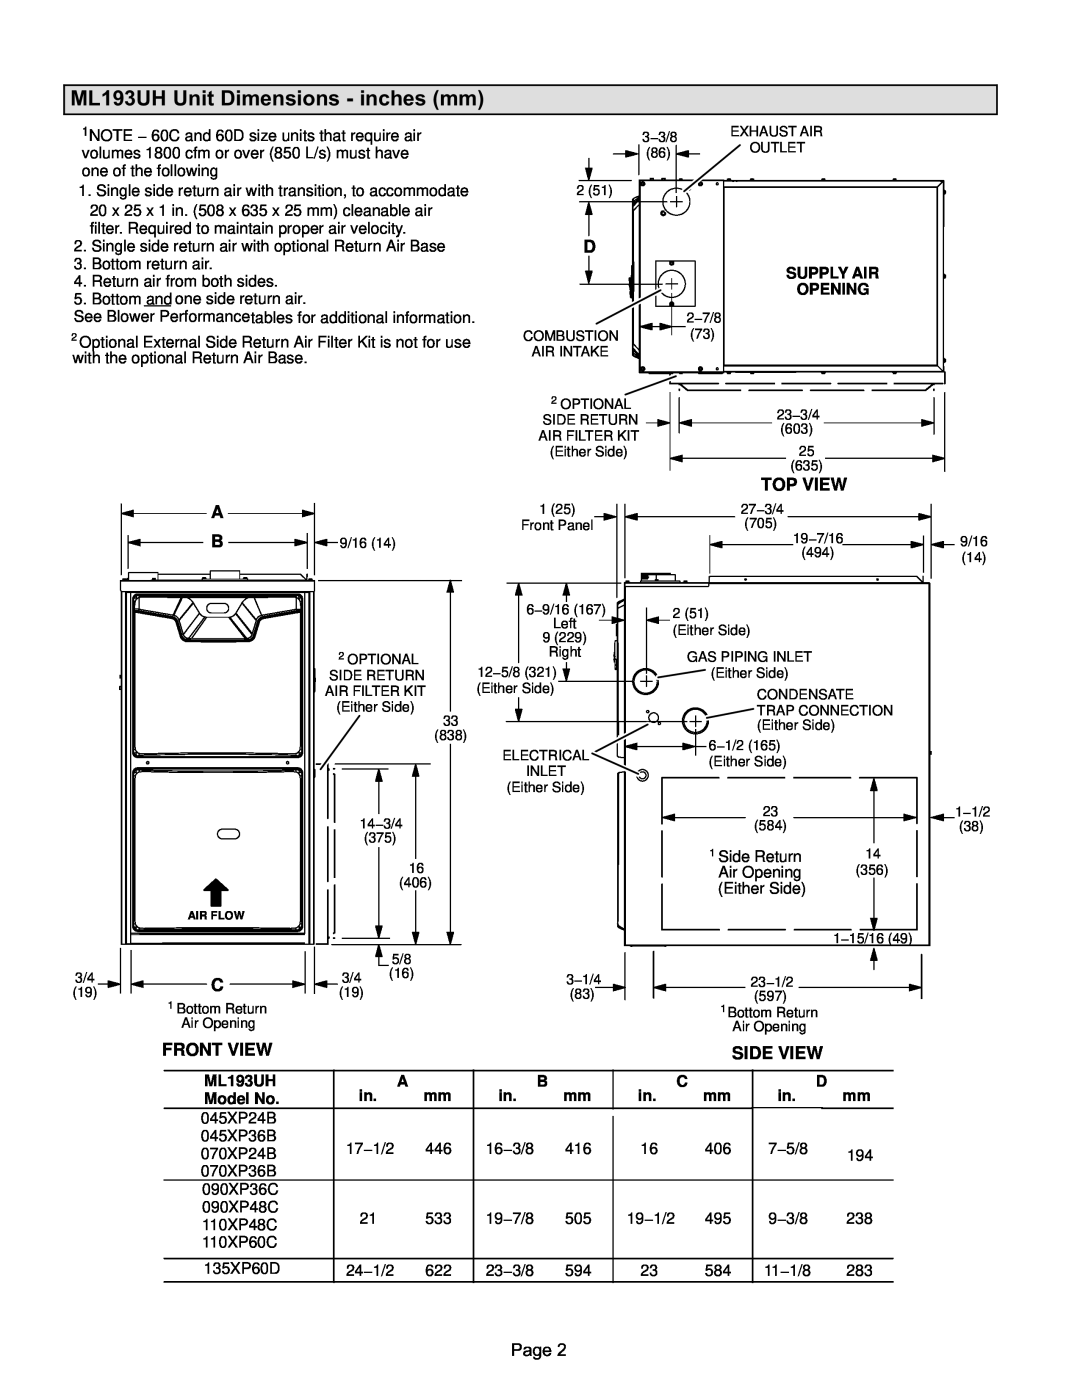 Lennox International Inc installation instructions ML193UH Unit Dimensions - inches mm, Supply Air, Opening, Model No 